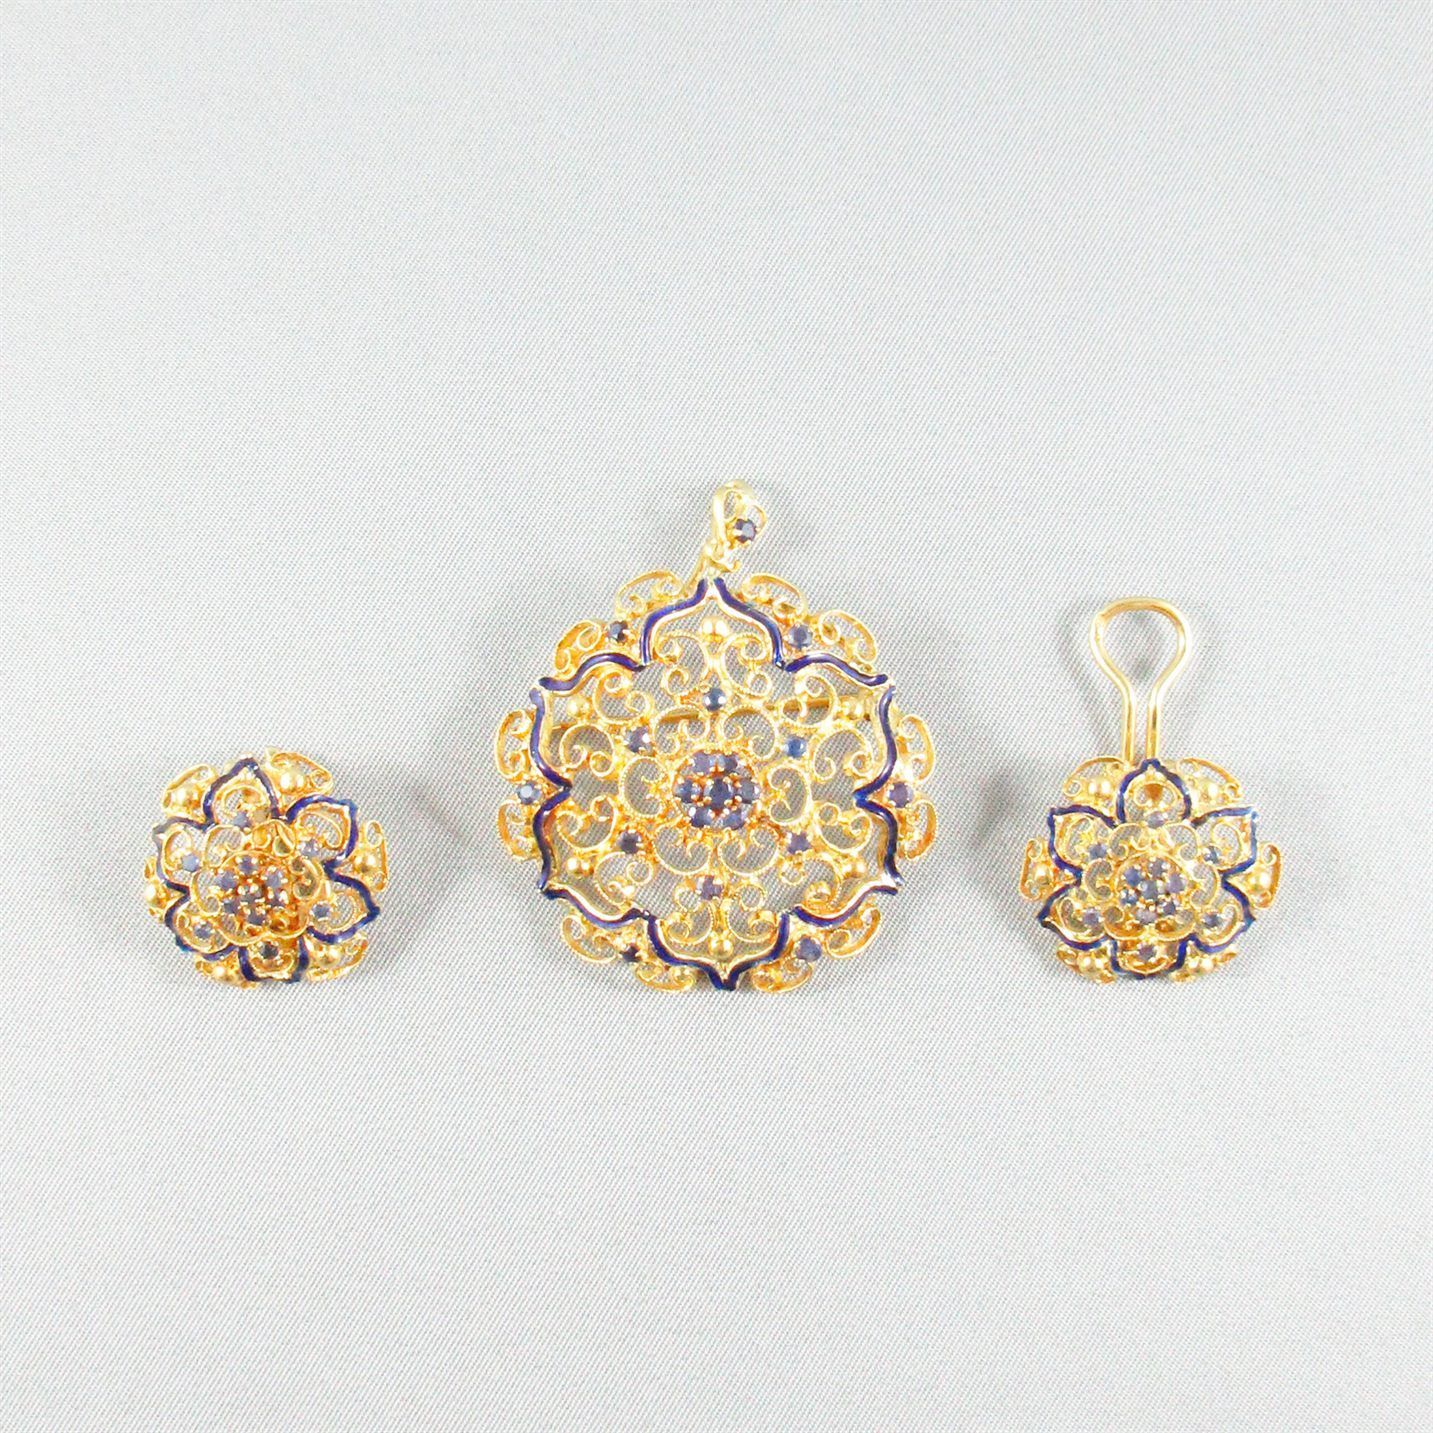 18K yellow gold blue sapphires brooch/pendant and earrings